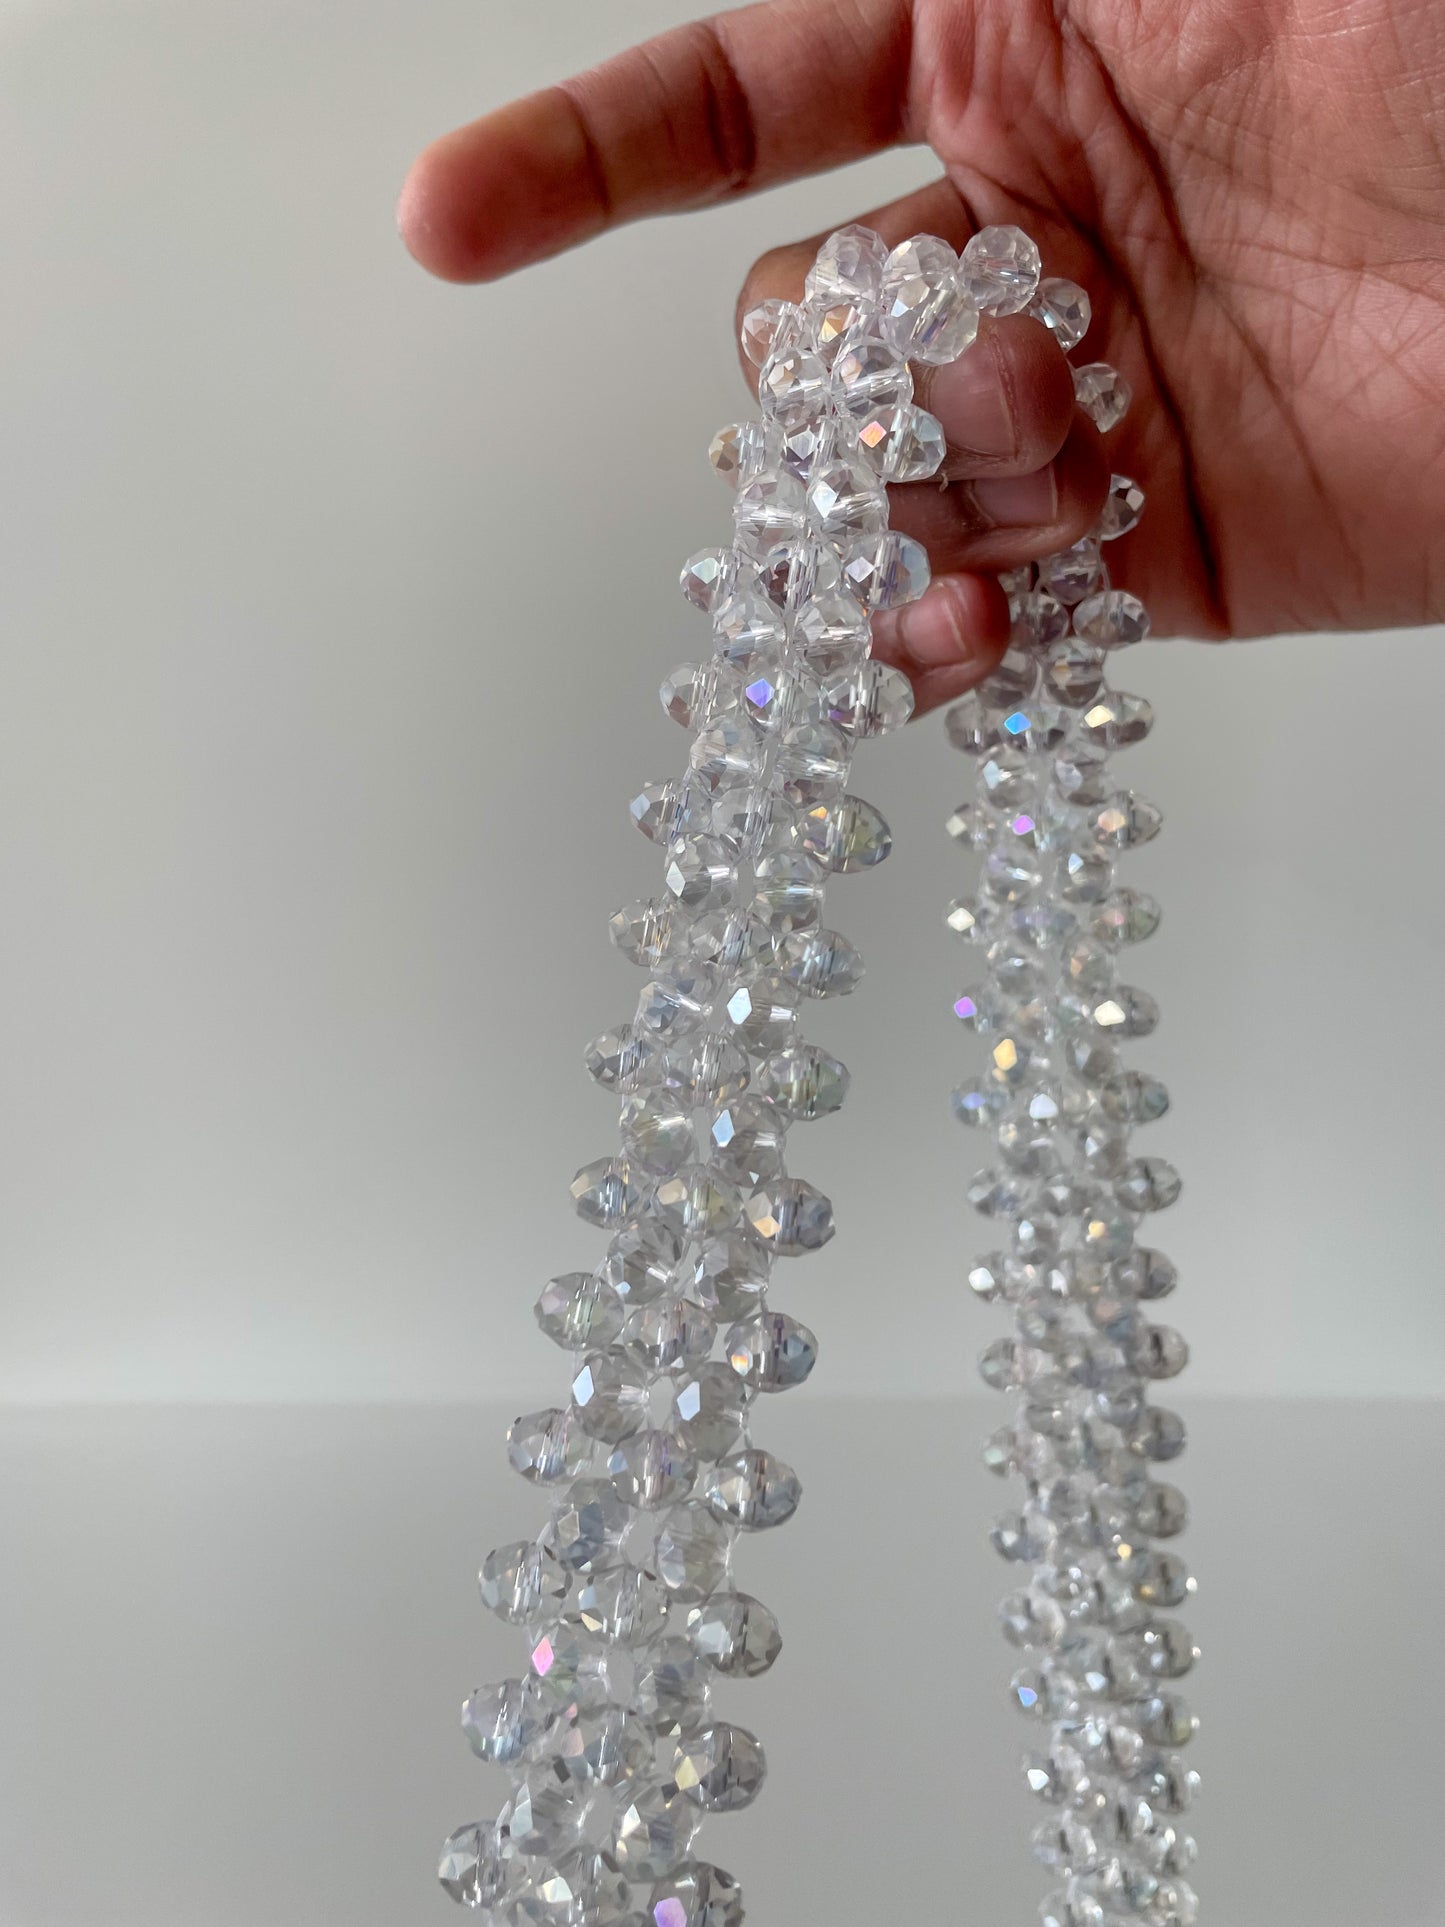 handcrafted crystal beads bag